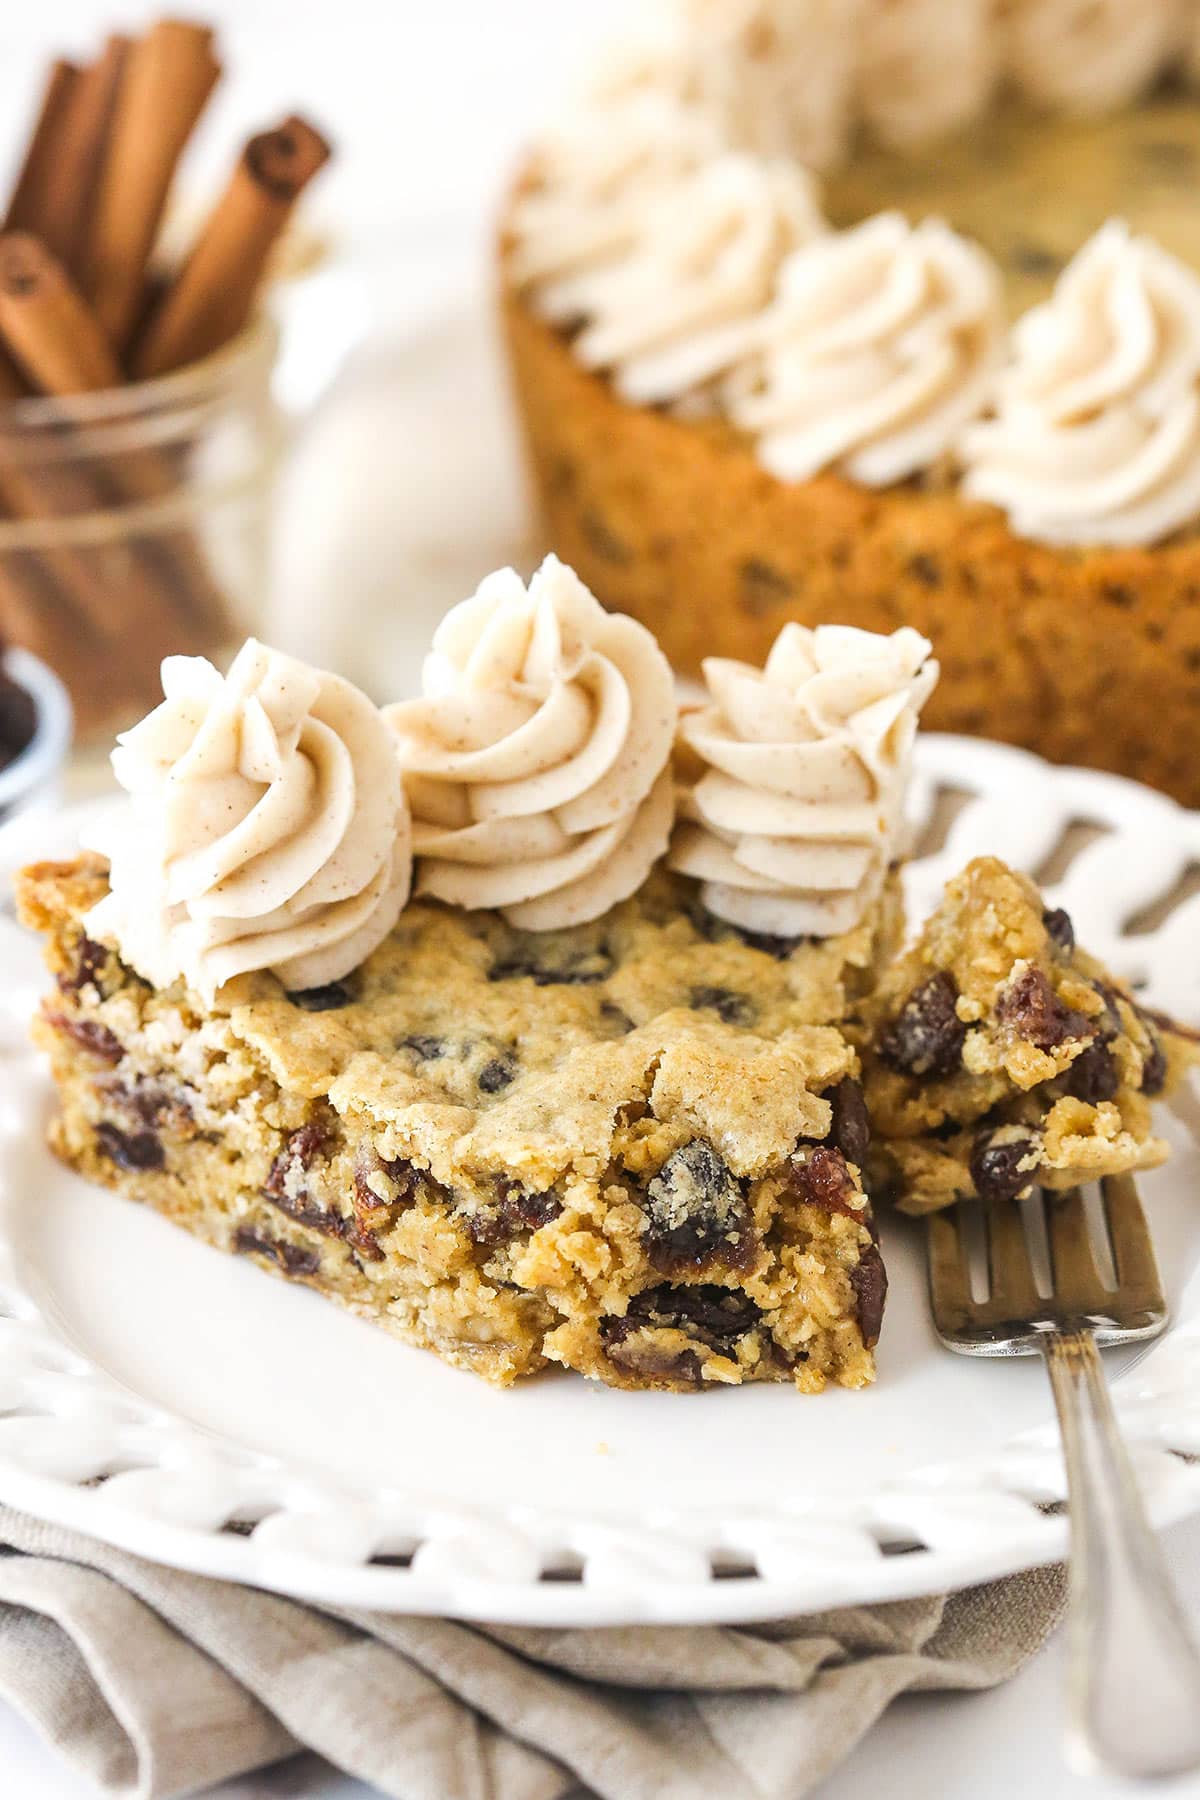 A fork taking a bite out of a slice of oatmeal raisin cookie cake.